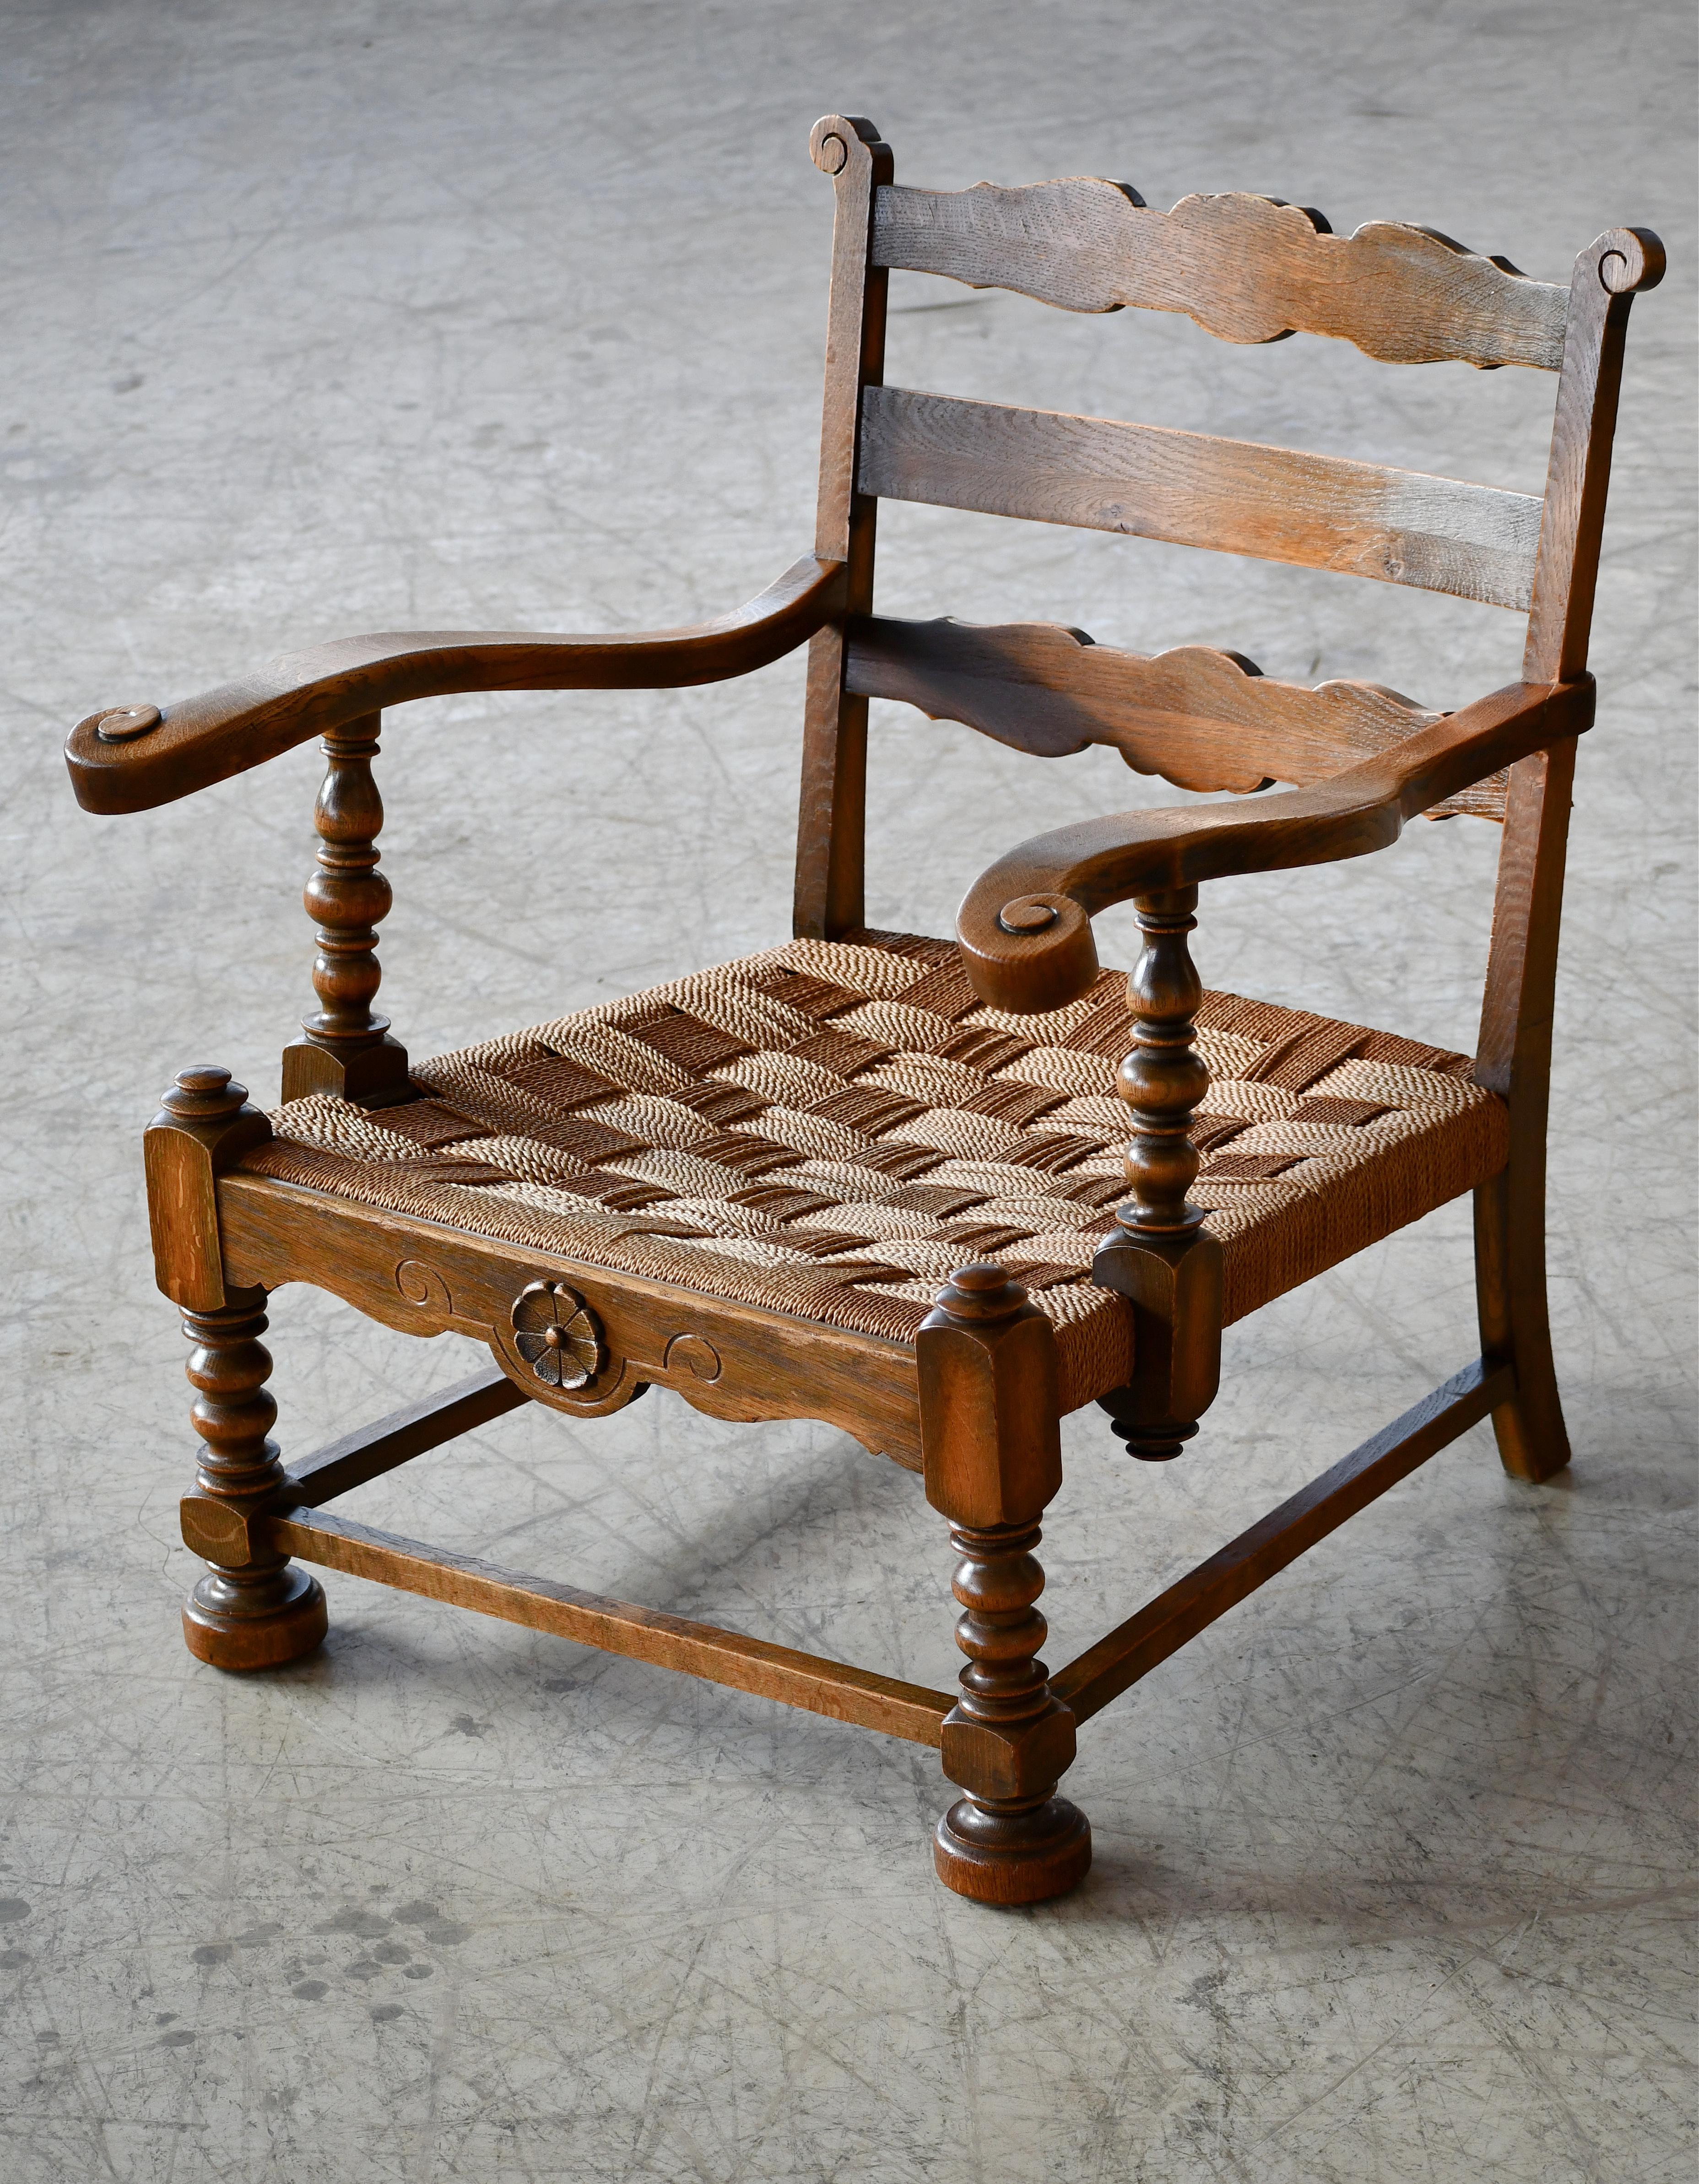 Great country style armchair made in Denmark in the early part of the 20th century. Hand carved from solid Mahogany and stained. Over time the chairs have achieved an absolutely remarkable patina. The wood is in overall good solid sturdy condition